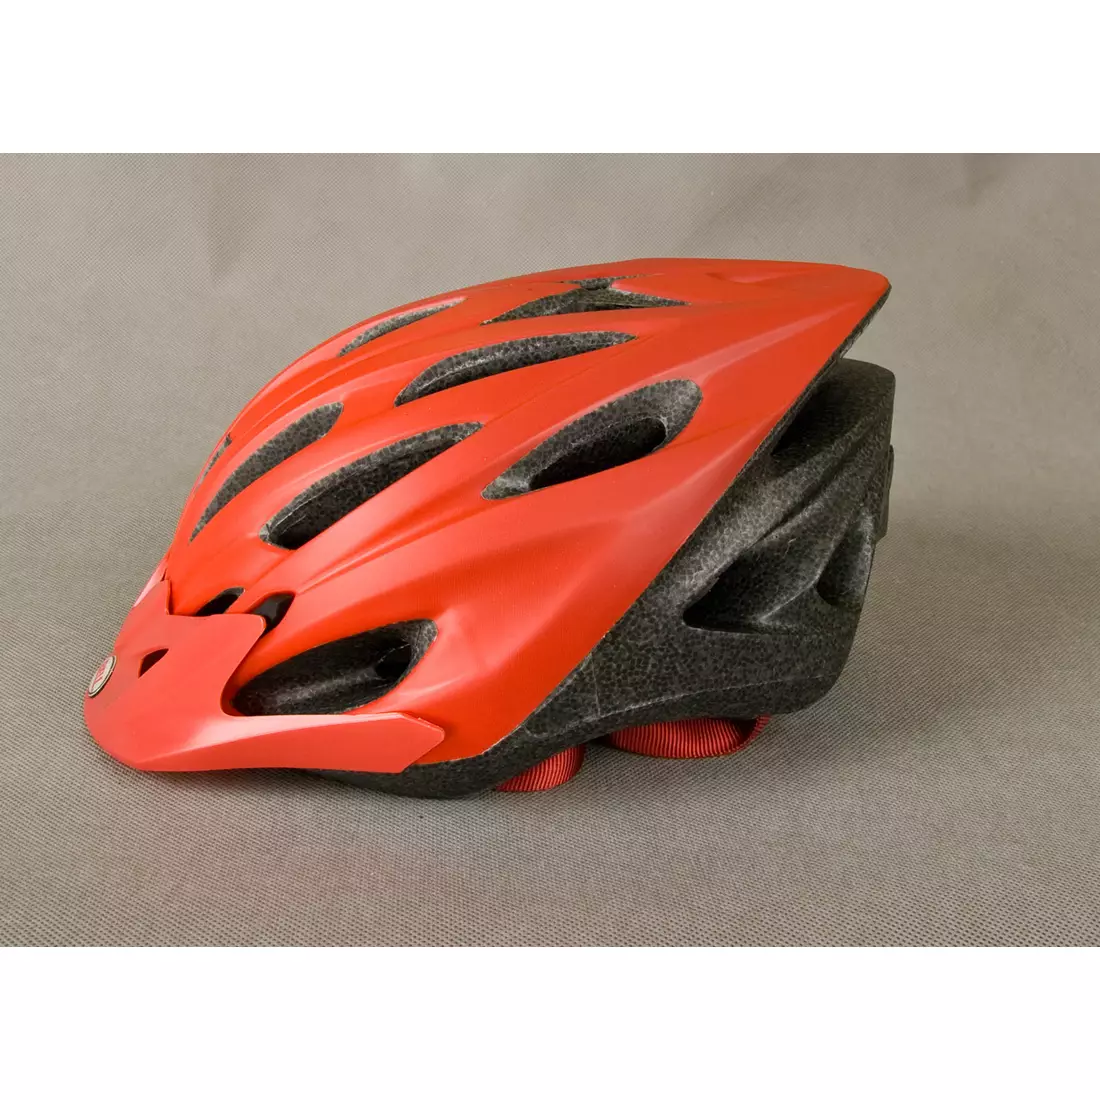 BELL bicycle helmet SOLAR FLARE red